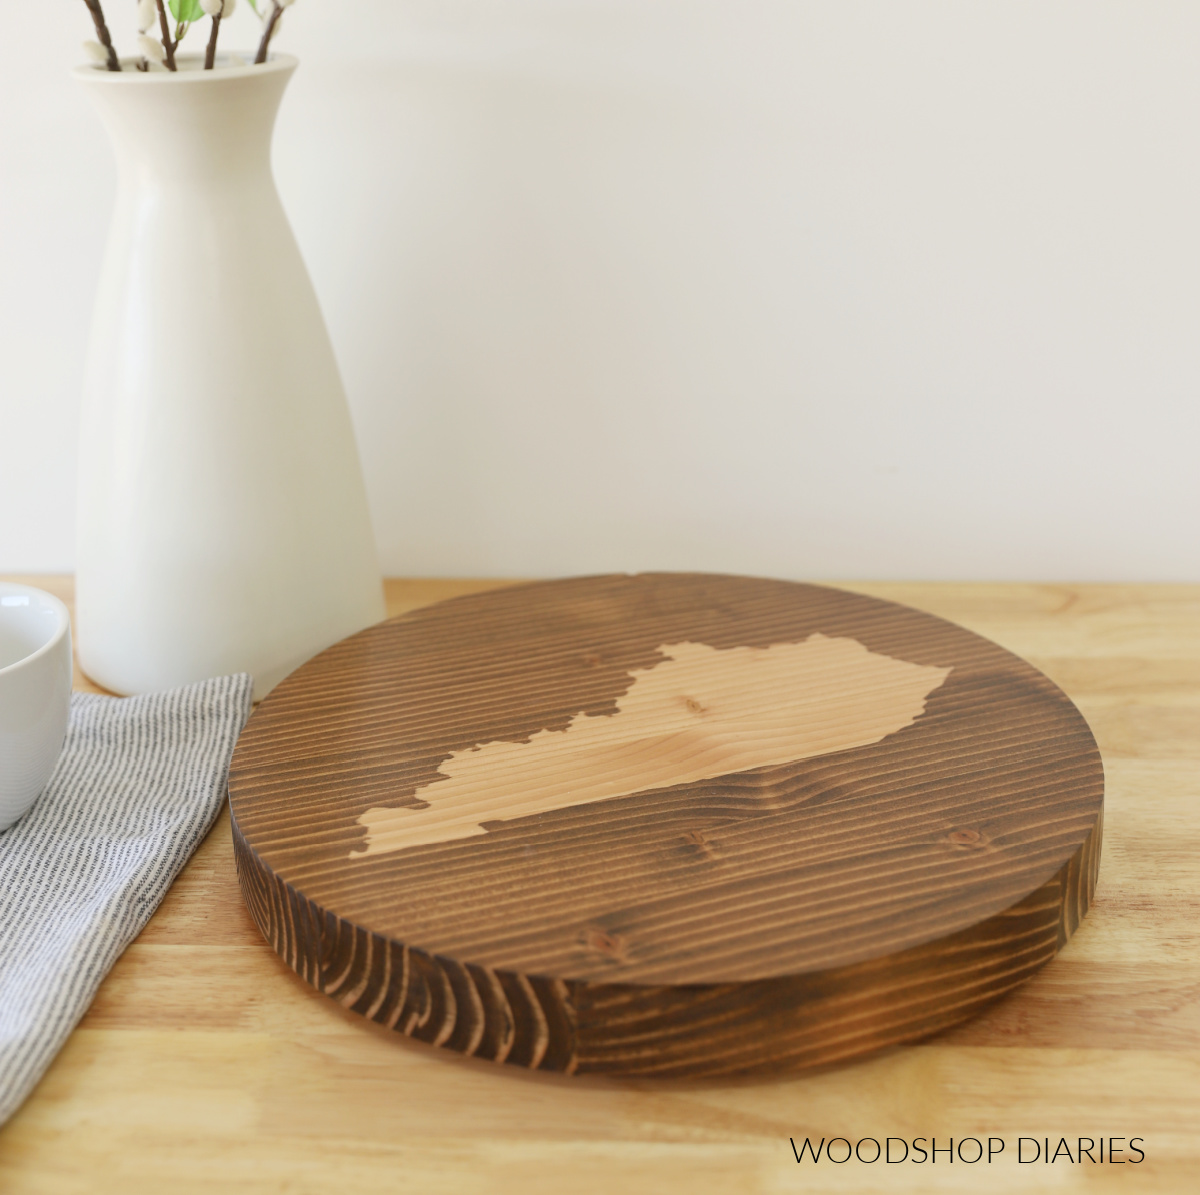 Completed DIY wooden lazy susan with Kentucky stained on top